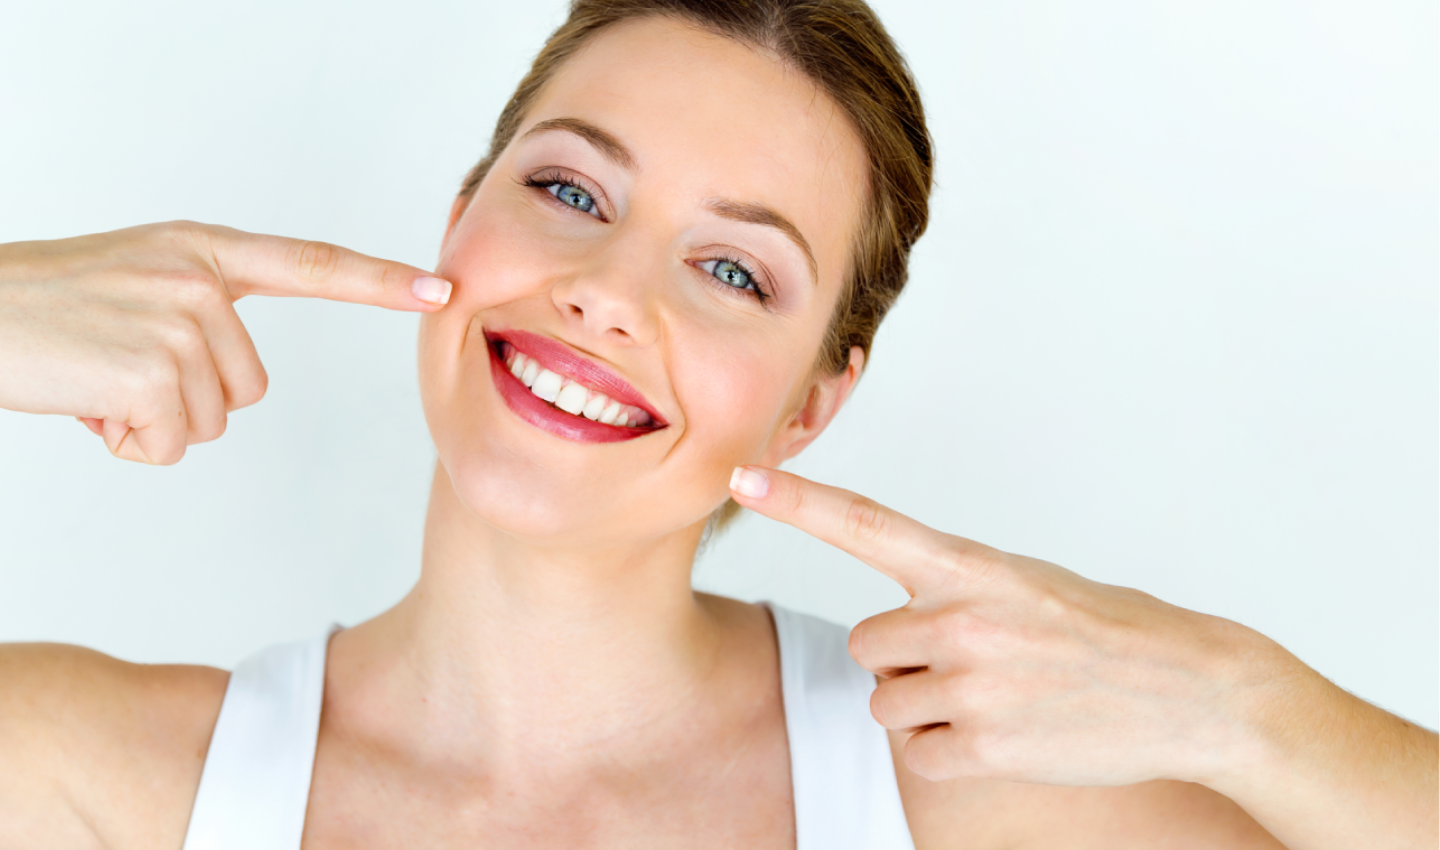 A woman laughing and showing a beautiful smile, demonstrating the rejuvenating effects of lip peels for achieving youthful and plump lips.